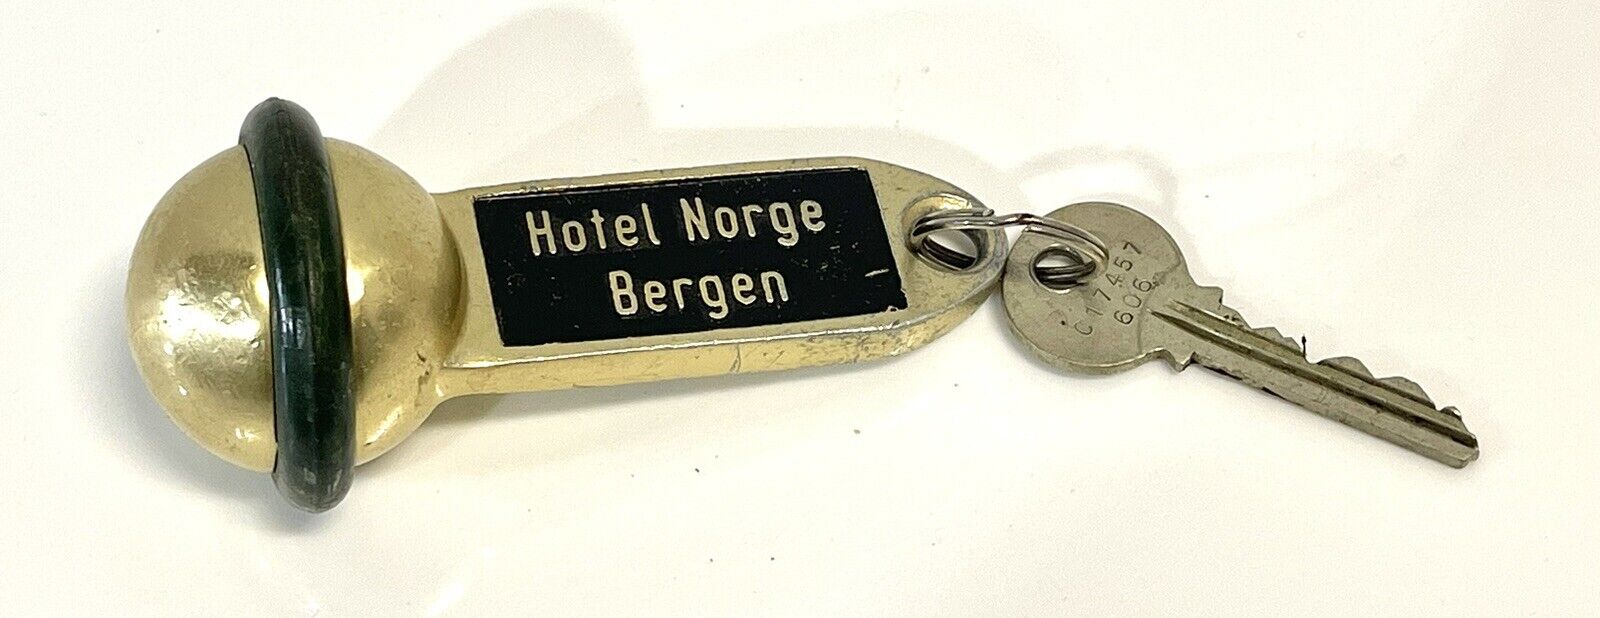 Vintage Hotel Norge Bergen Room Key And Fob Europe